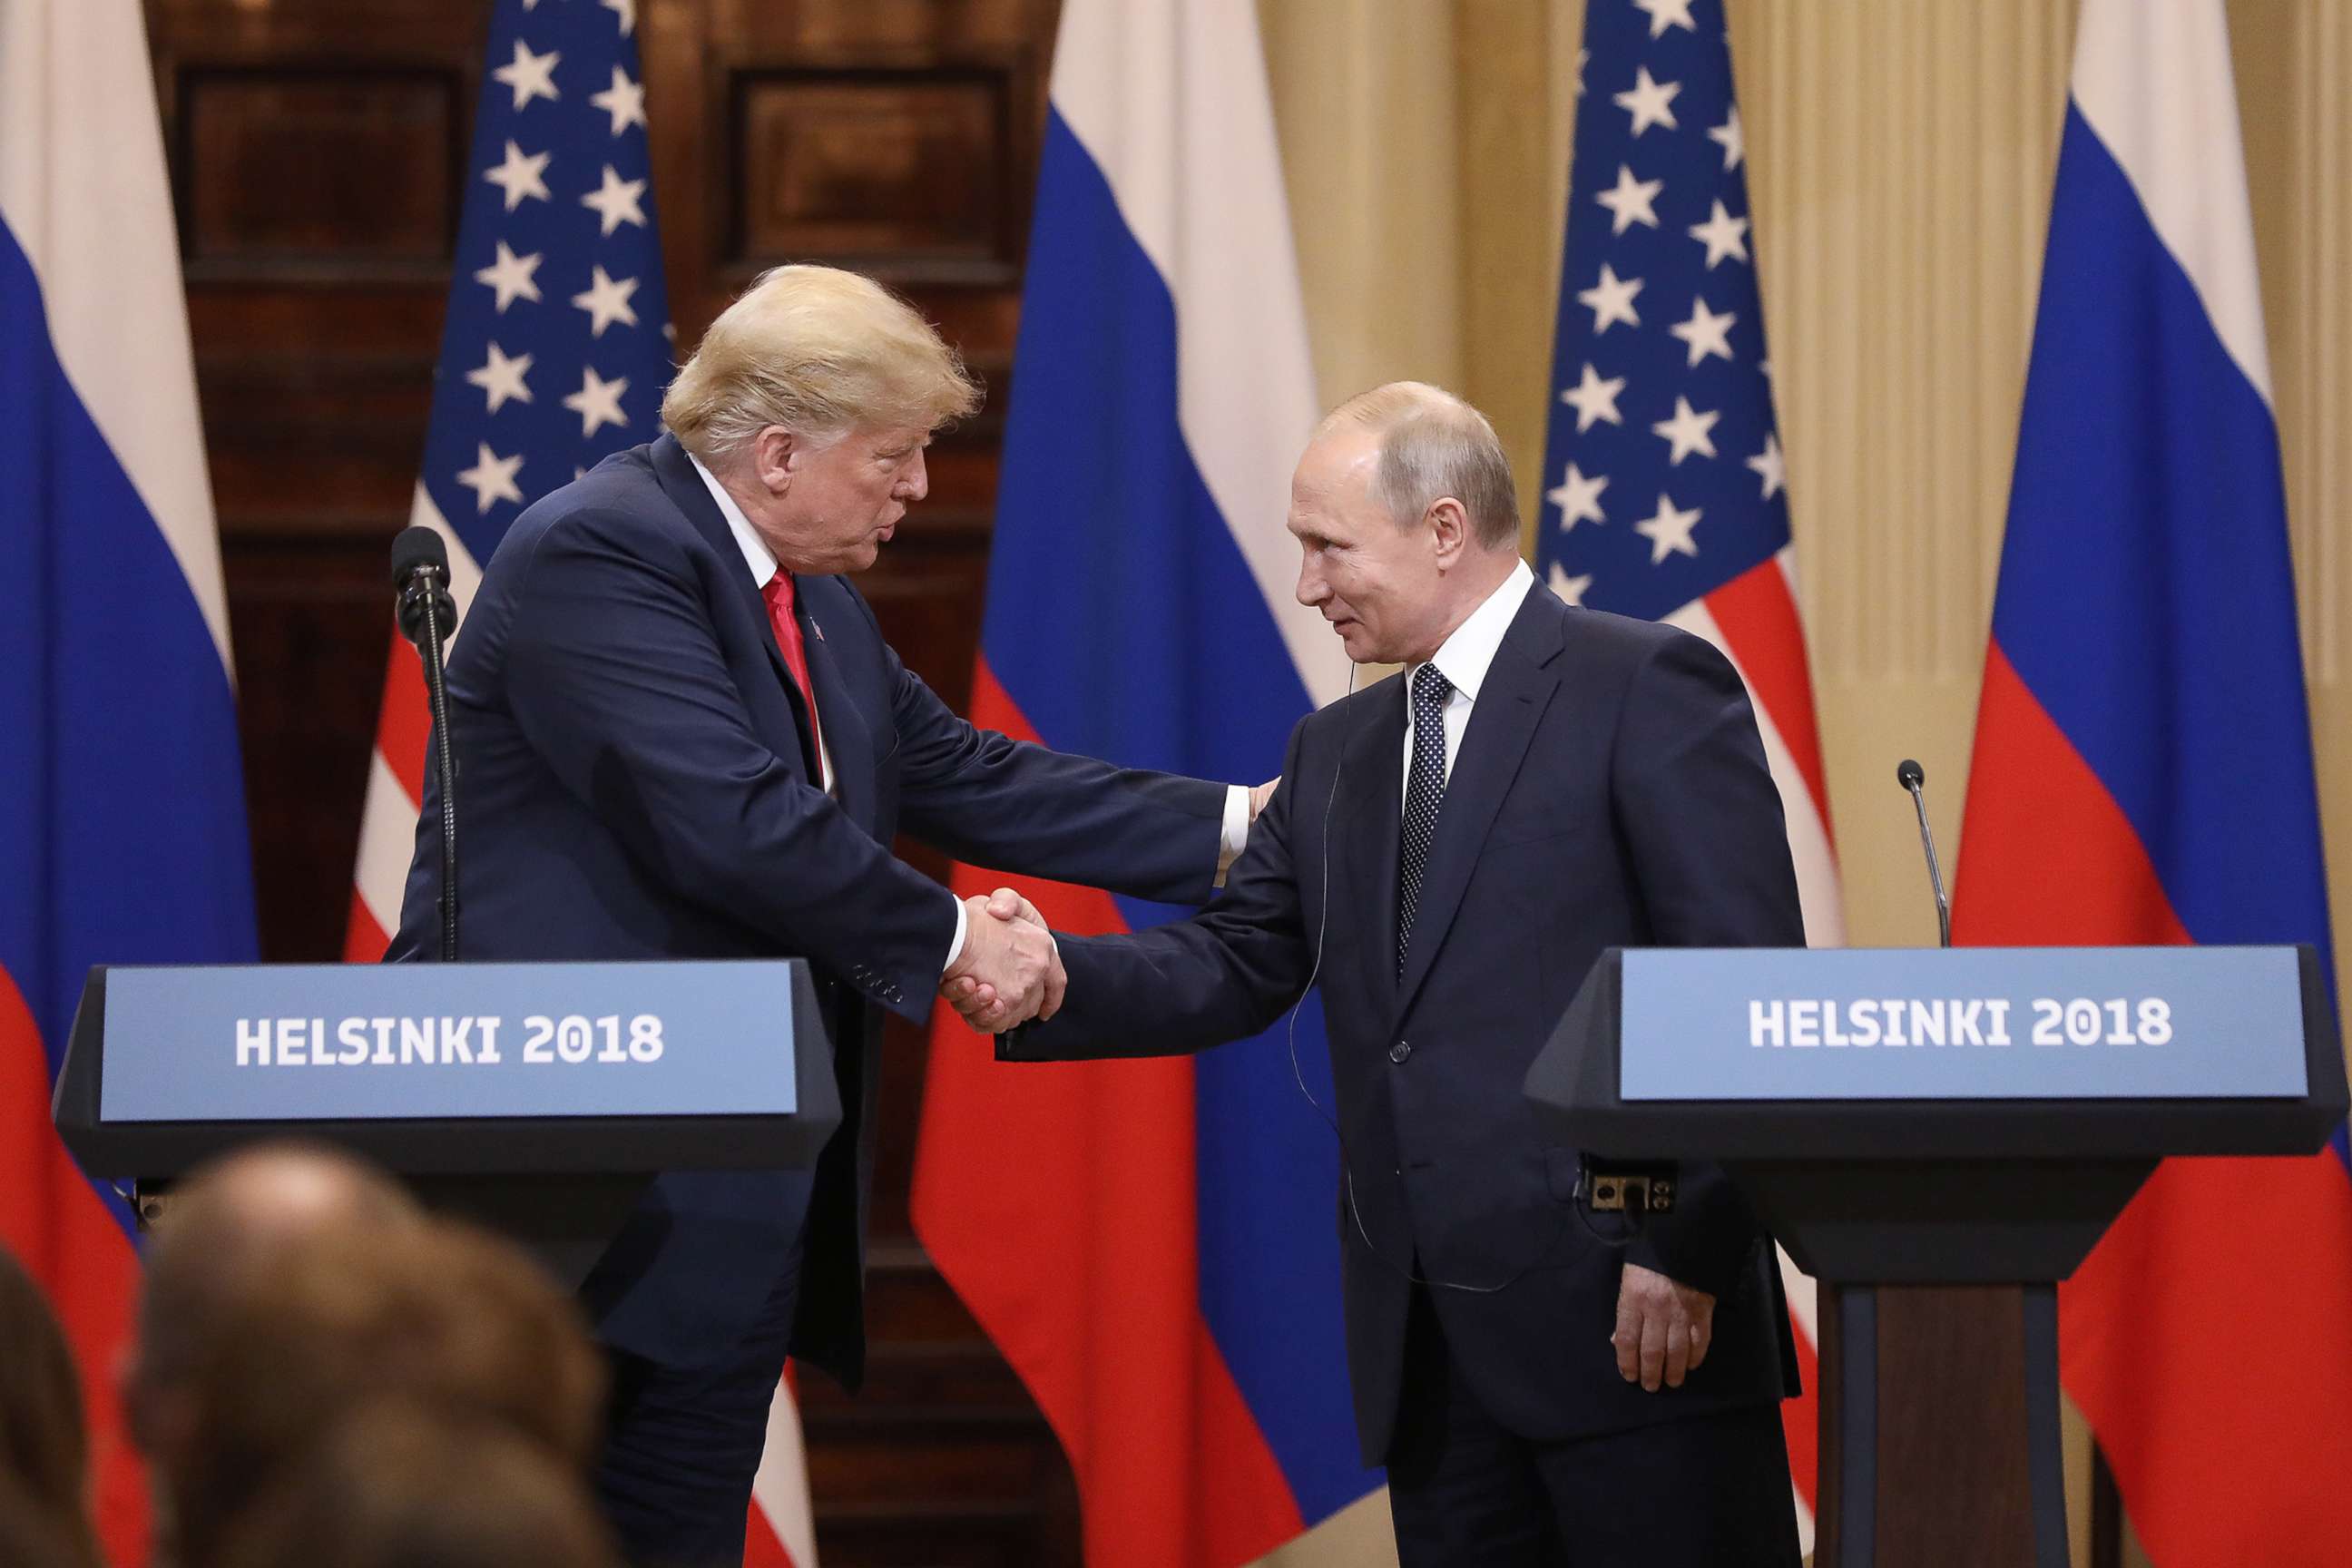 PHOTO: President Donald Trump shakes hands with Russian President Vladimir Putin during a news conference in Helsinki, Finland, July 16, 2018.